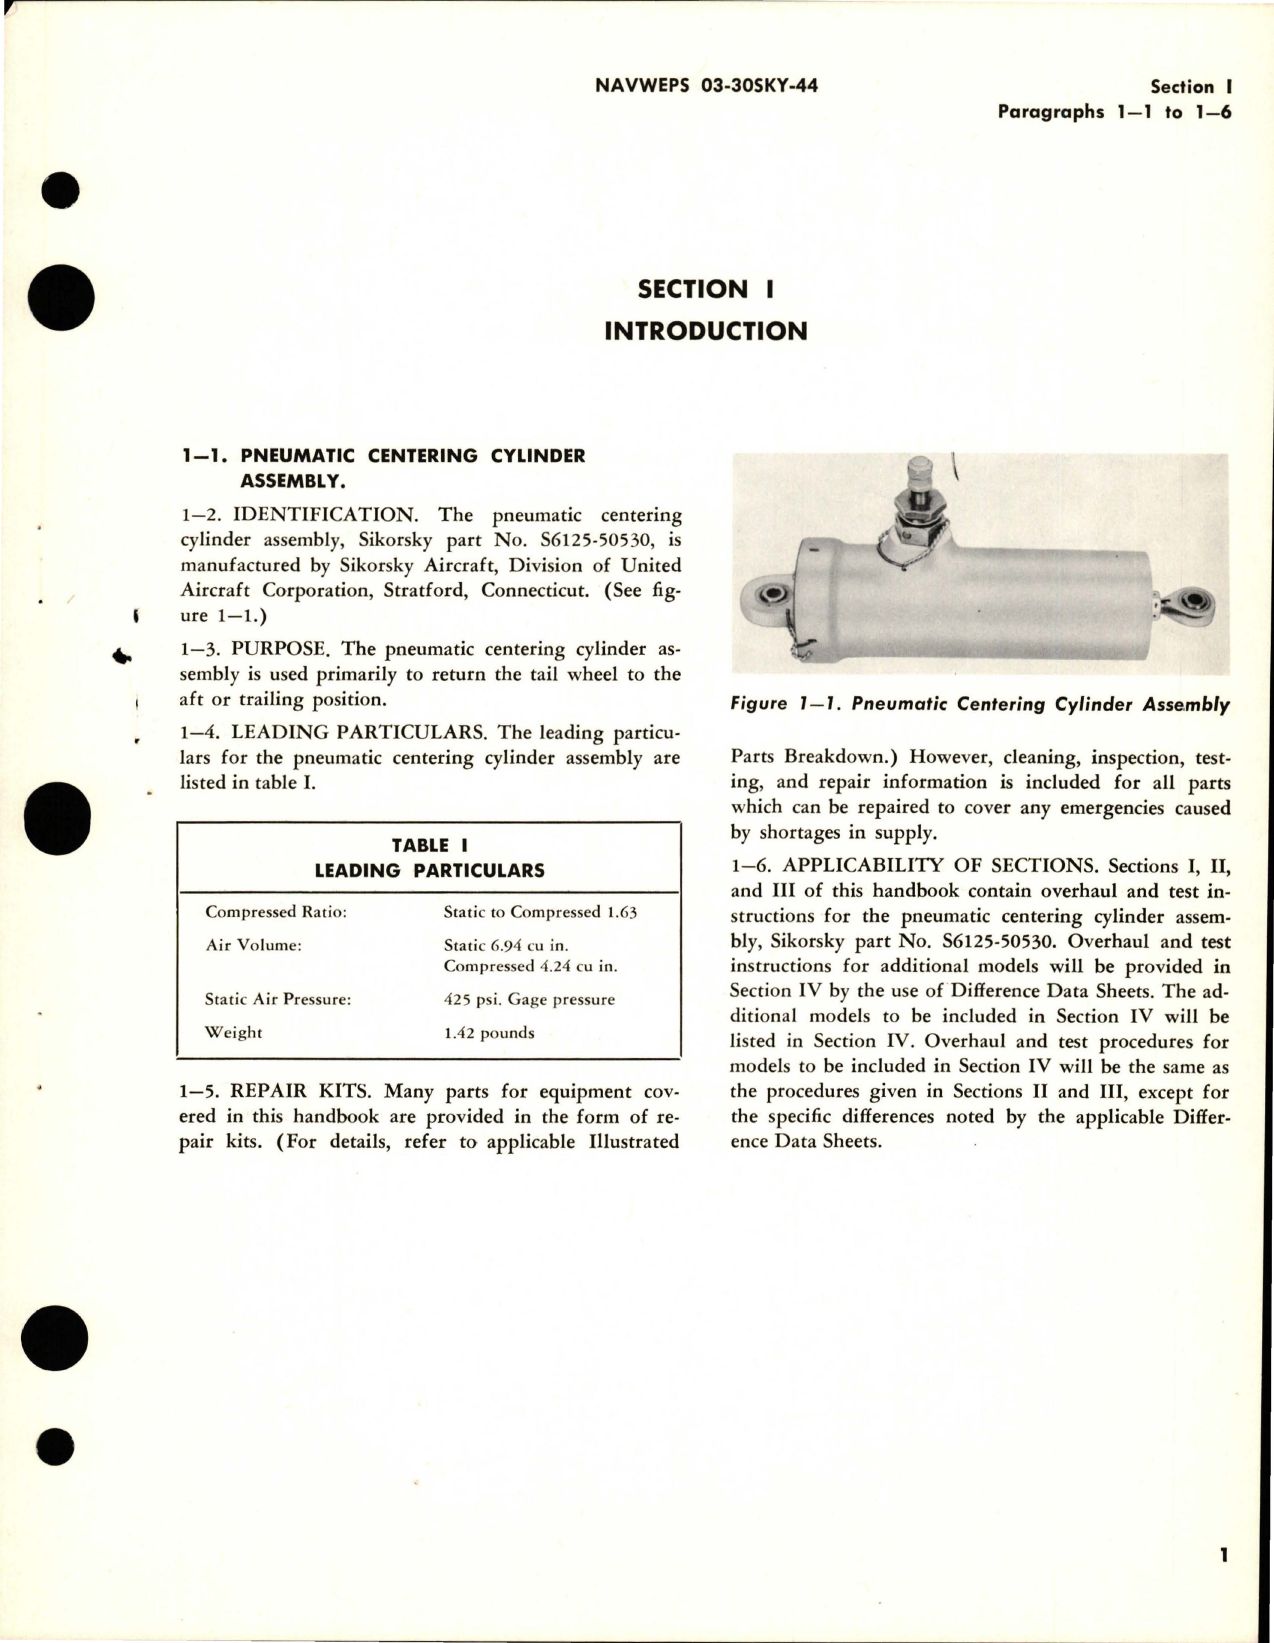 Sample page 5 from AirCorps Library document: Overhaul Instructions for Pneumatic Centering Cylinder Assembly - Part S6125-50530